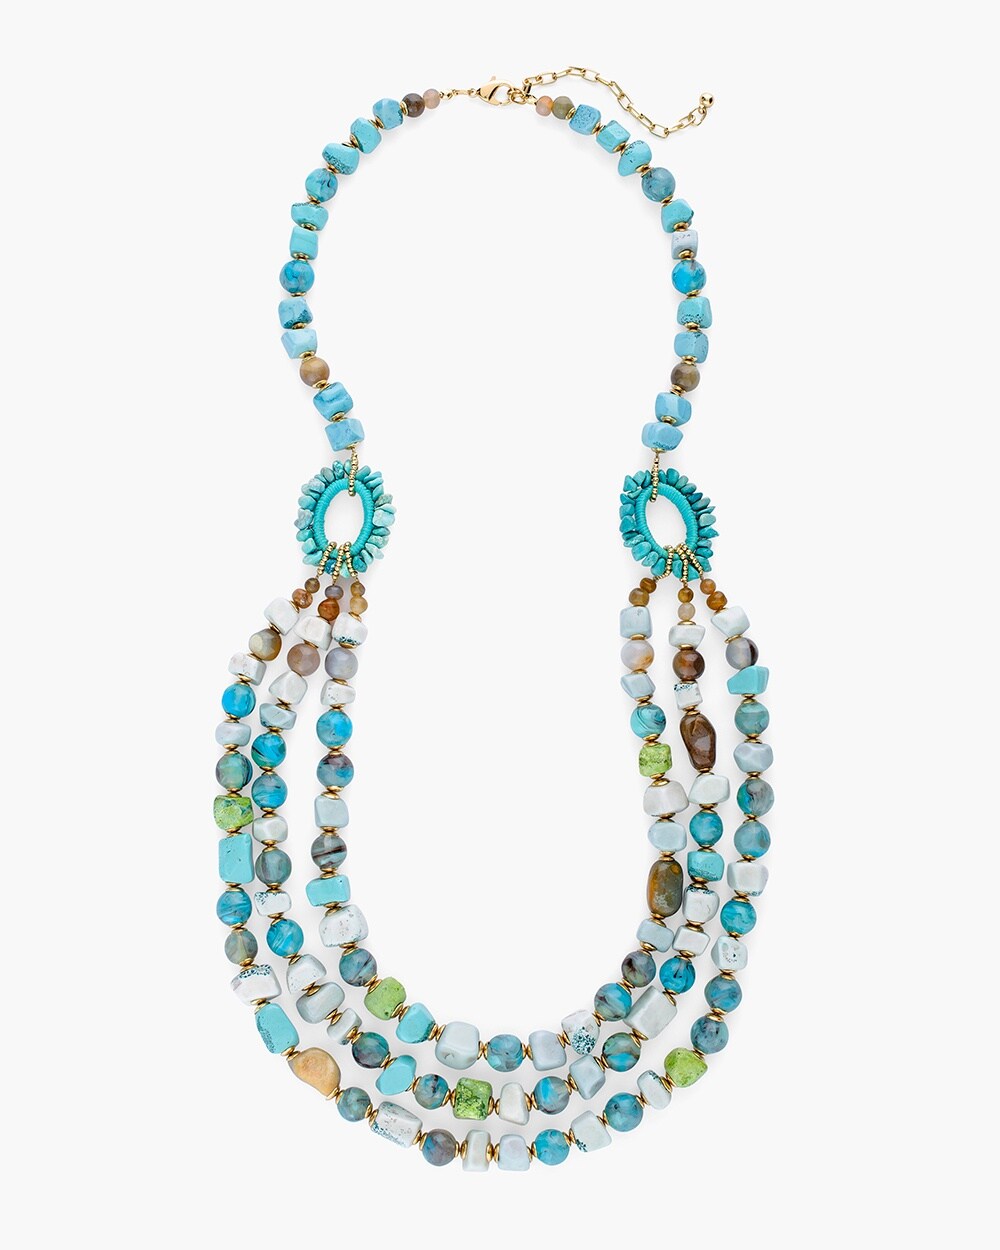 Turquoise and Neutral Multi-Strand Necklace